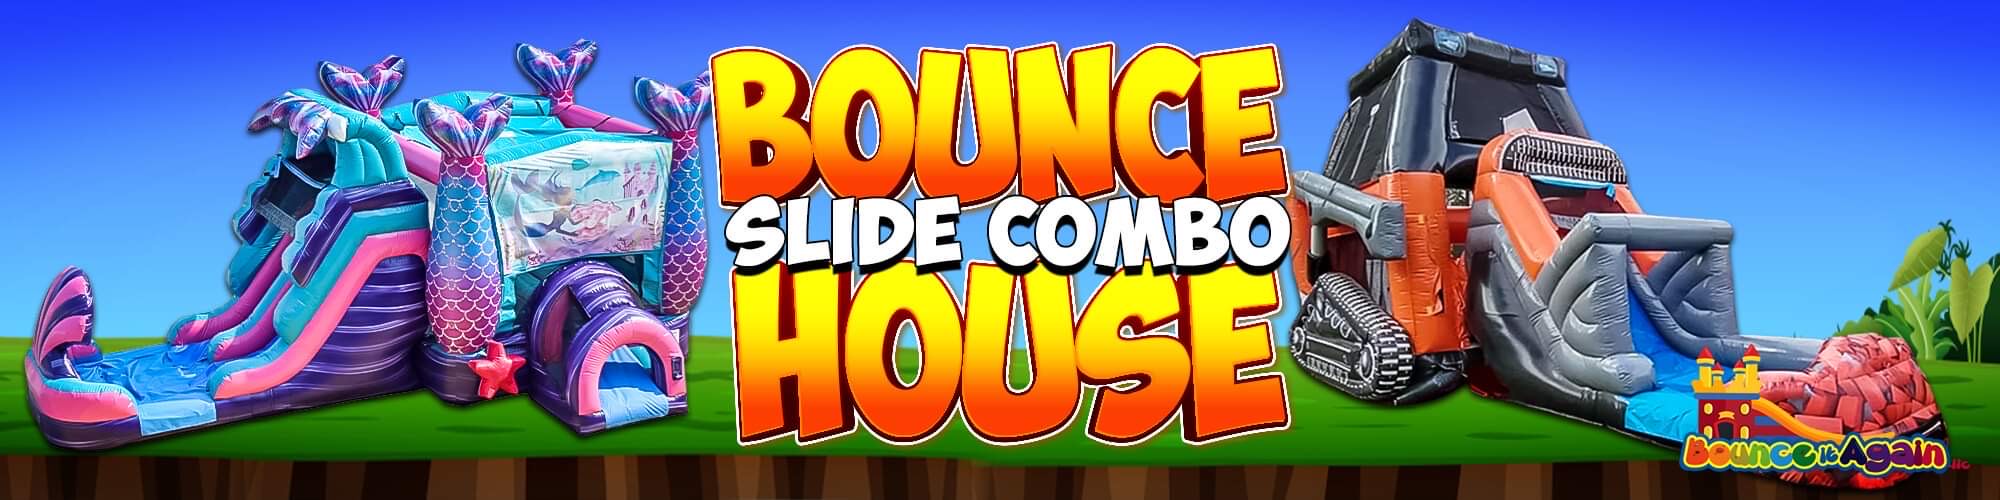 Bounce House Rentals in Lakeland, FL